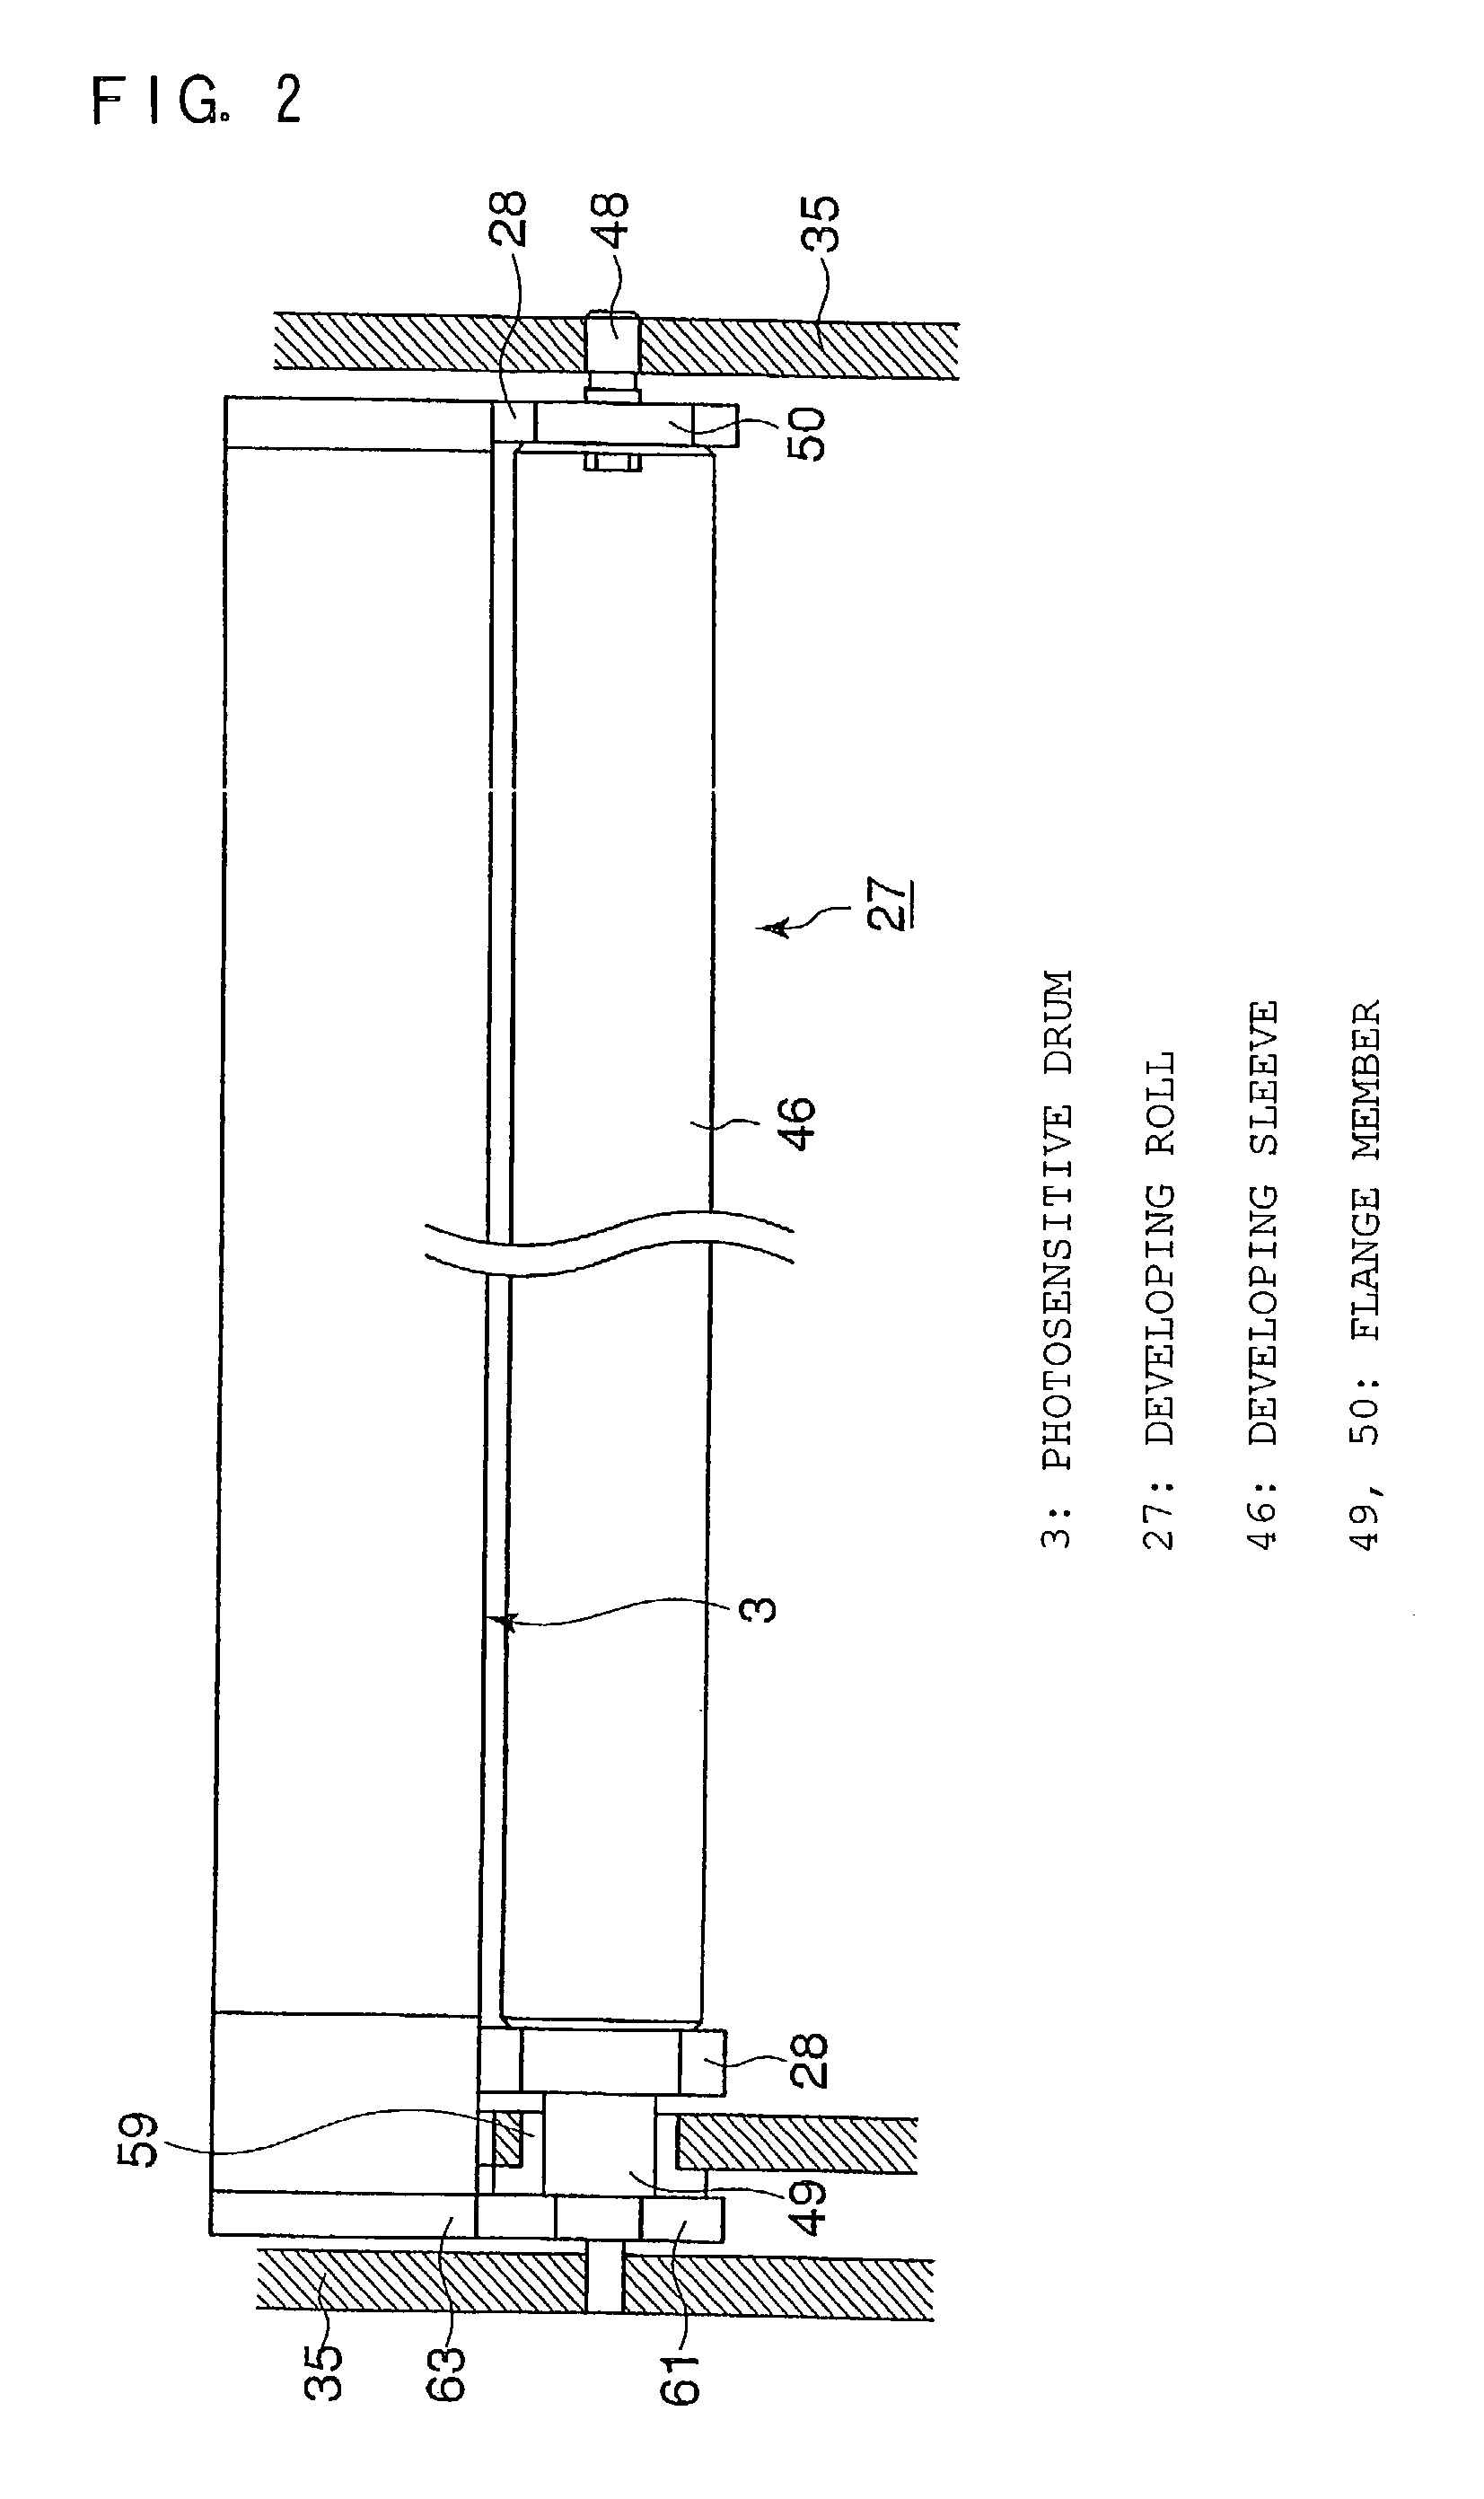 Recycle developer bearing body, inspection method and inspection device thereof, method of recycling a developer bearing body, and method of recycling a used process cartridge